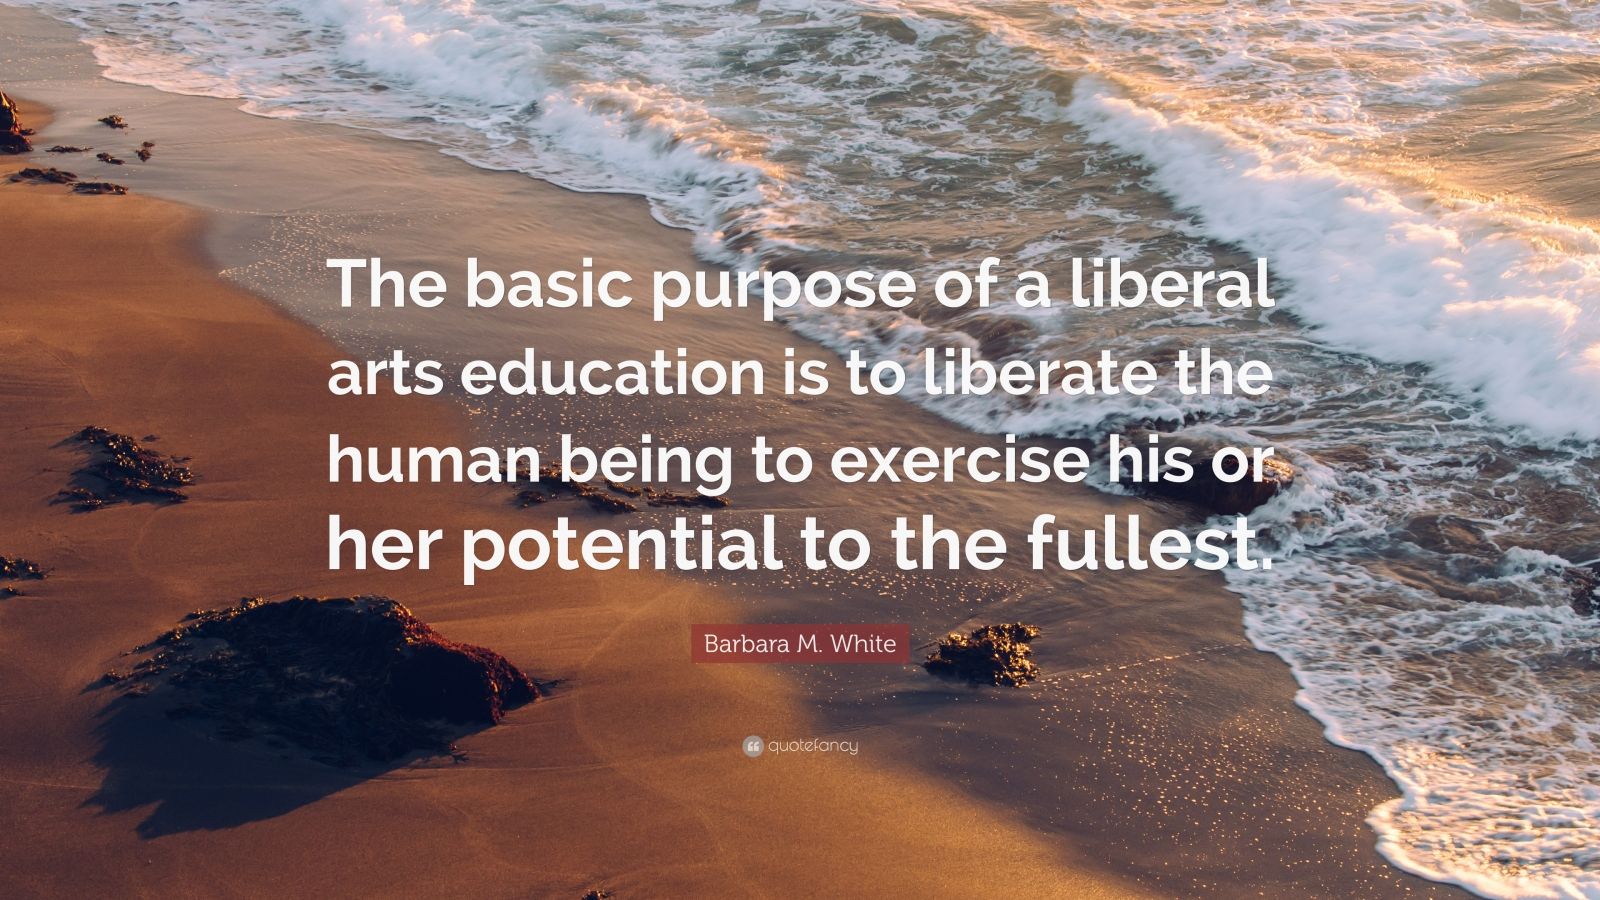 Barbara M. White Quote: “The basic purpose of a liberal arts education ...